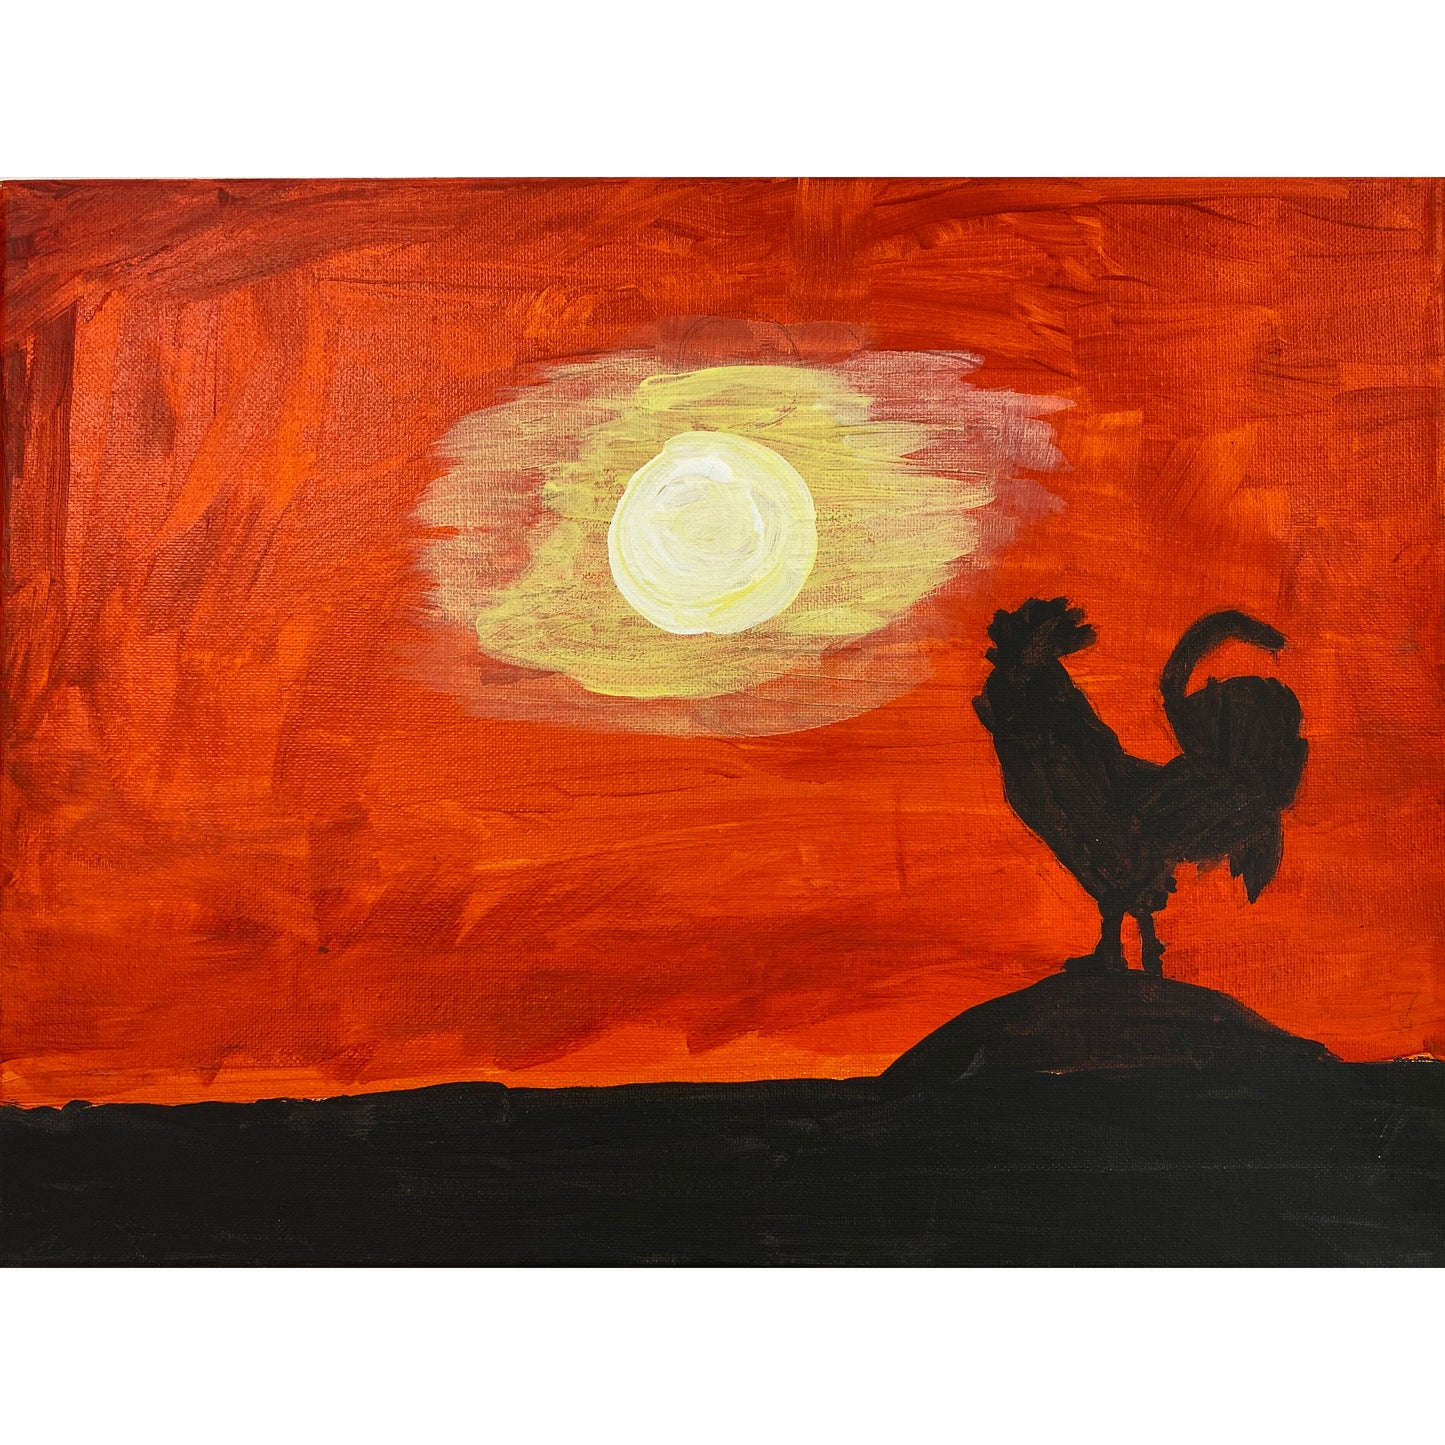 Acrylic Paint on Stretched Canvas, 16 x 12 Original Fine Art, Rooster made by Jennifer Evje